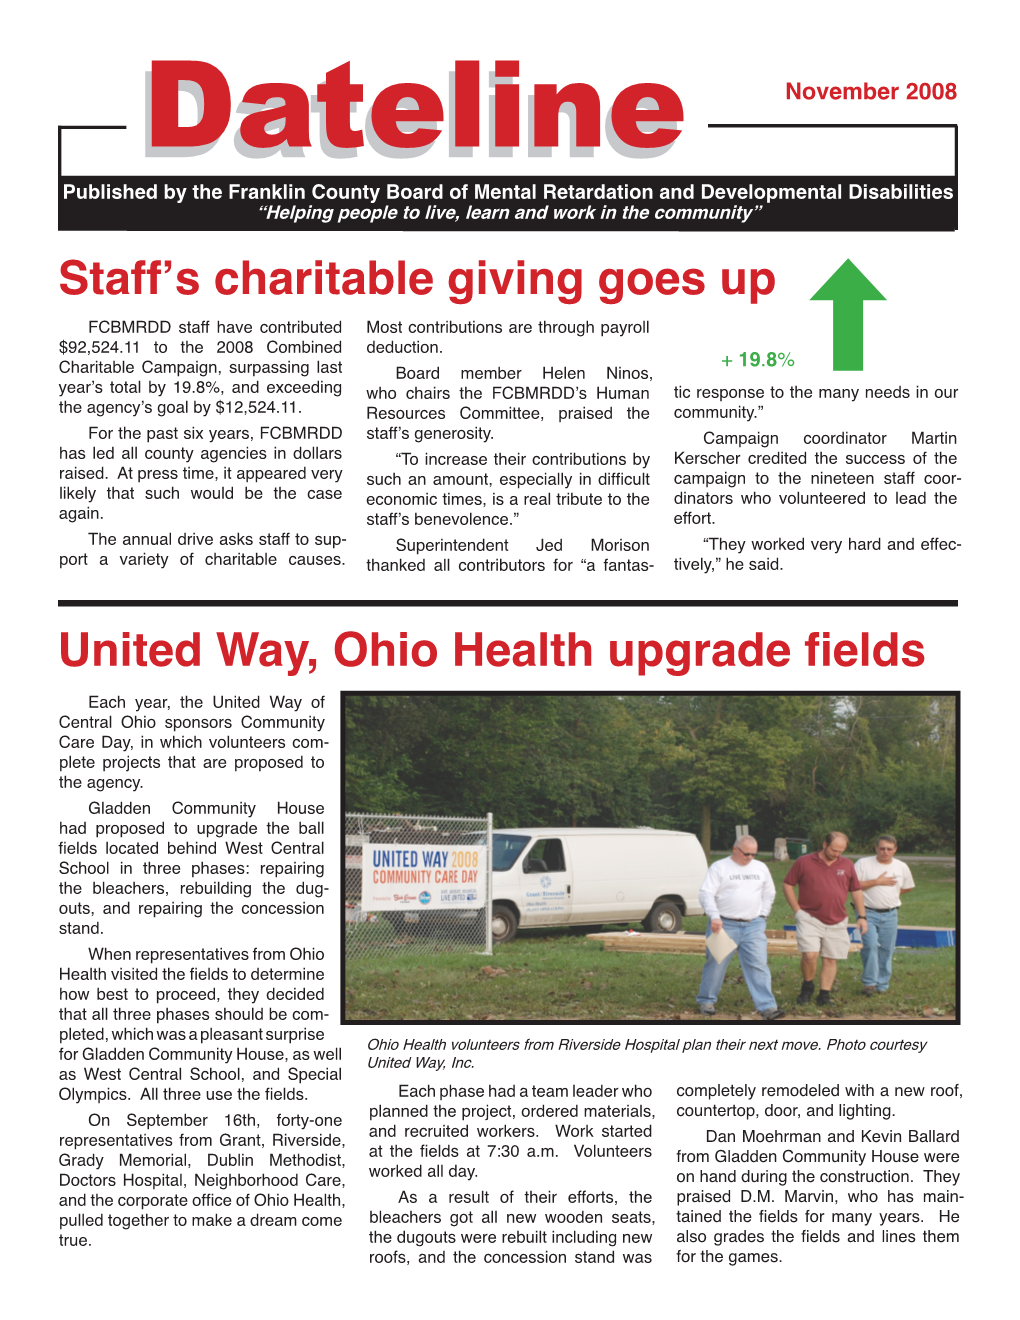 Staff's Charitable Giving Goes up United Way, Ohio Health Upgrade Fields